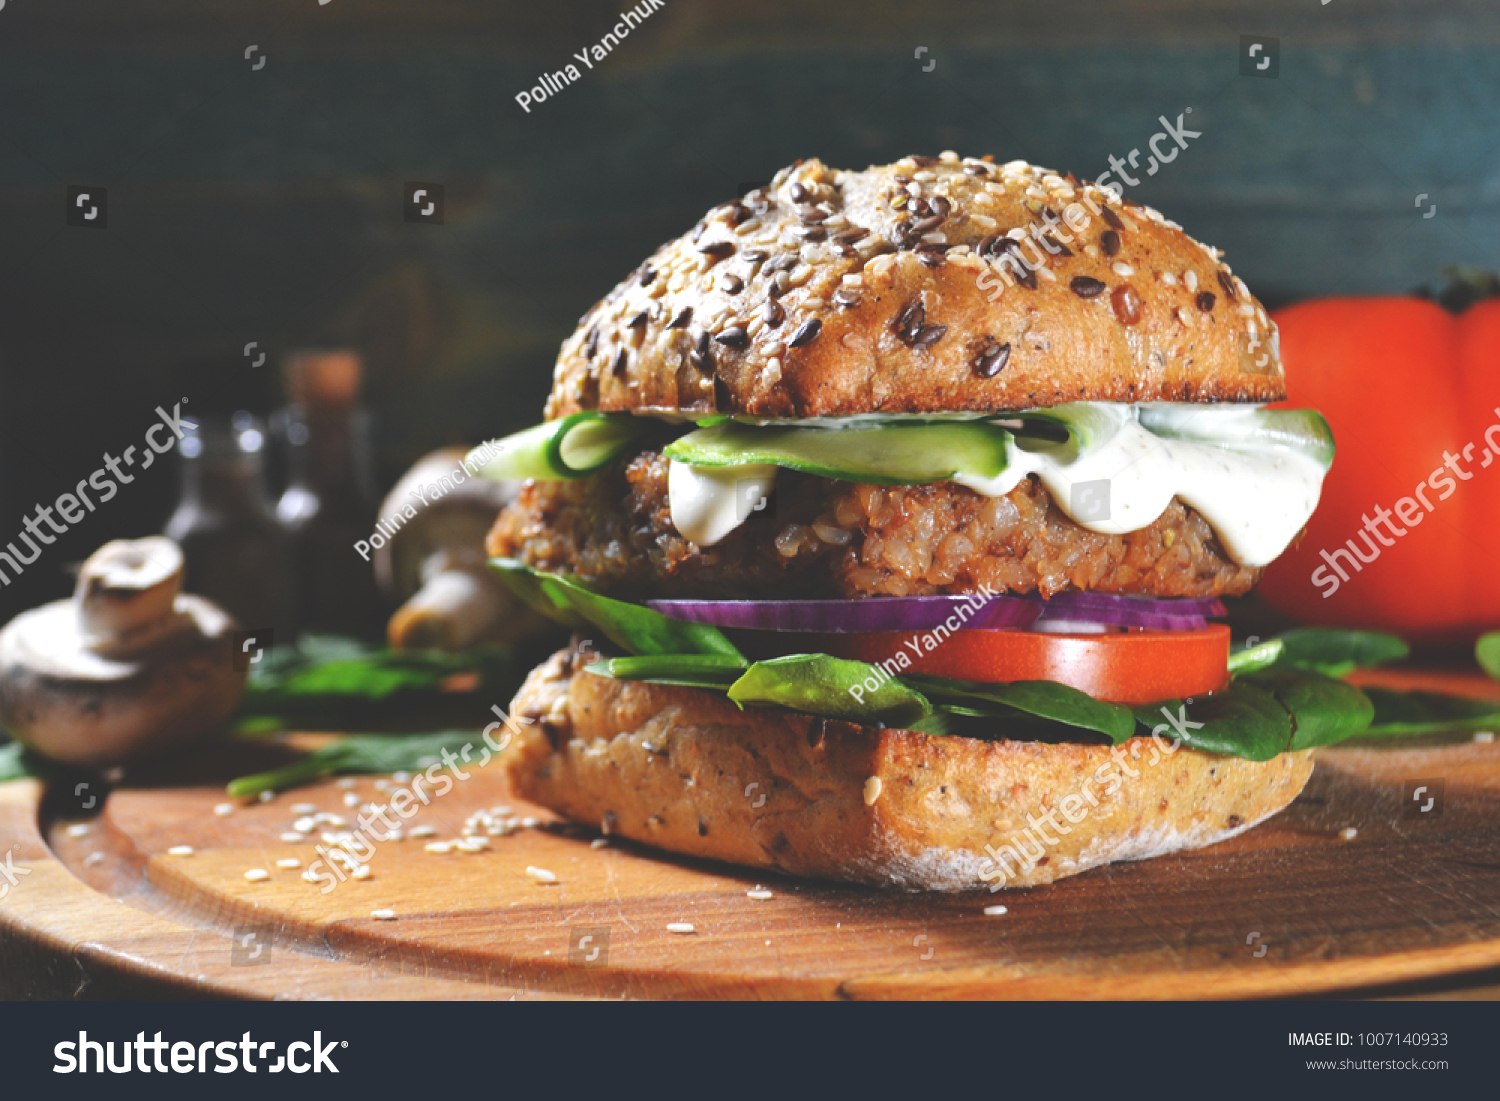 veggie, vegan burger with buckwheat, tomato, onion, vegan mayonnaise and spinach on a fresh bun with flax seeds and sesame, surrounded by spinach leaves, mushrooms, tomato, black pepper and spices. #1007140933